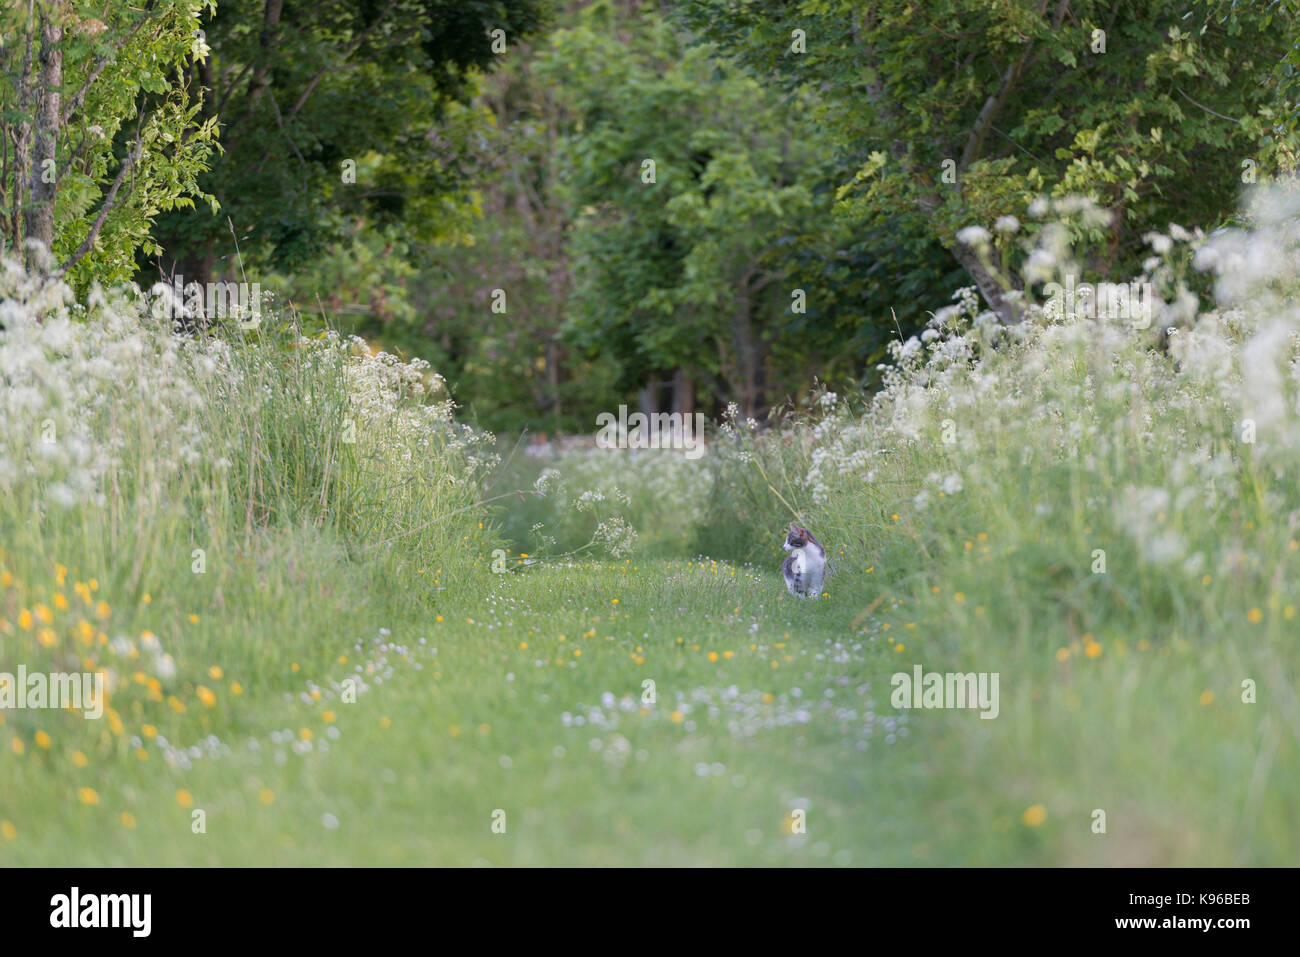 A Grey and White Pet Cat Hunting on a Grass Path Lined with Cow Parsley (Anthriscus Sylvestris) Stock Photo